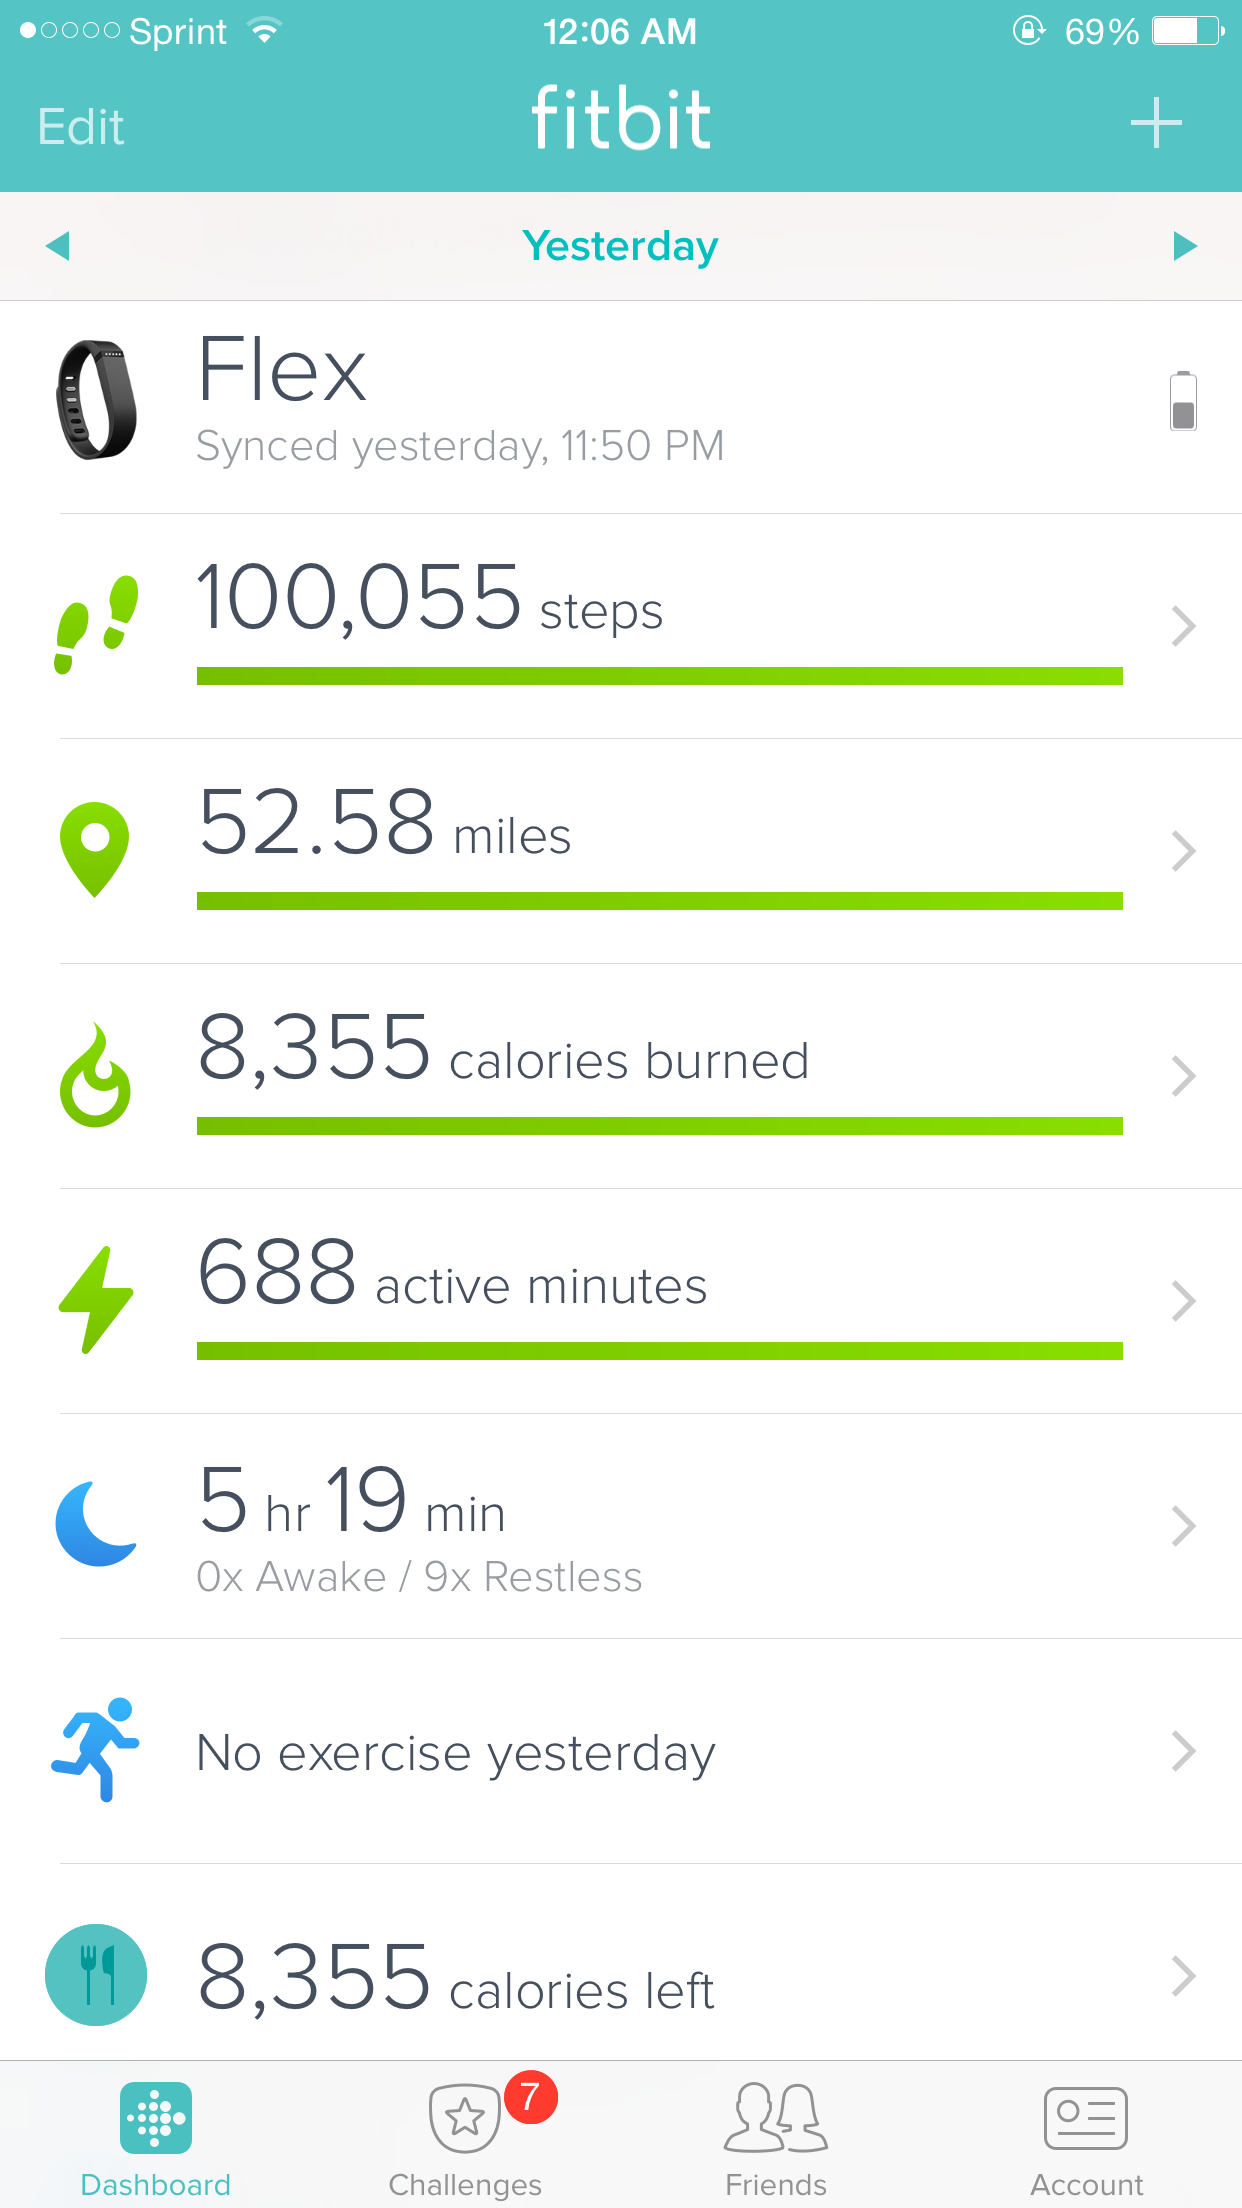 person average 80,000 steps in a day 